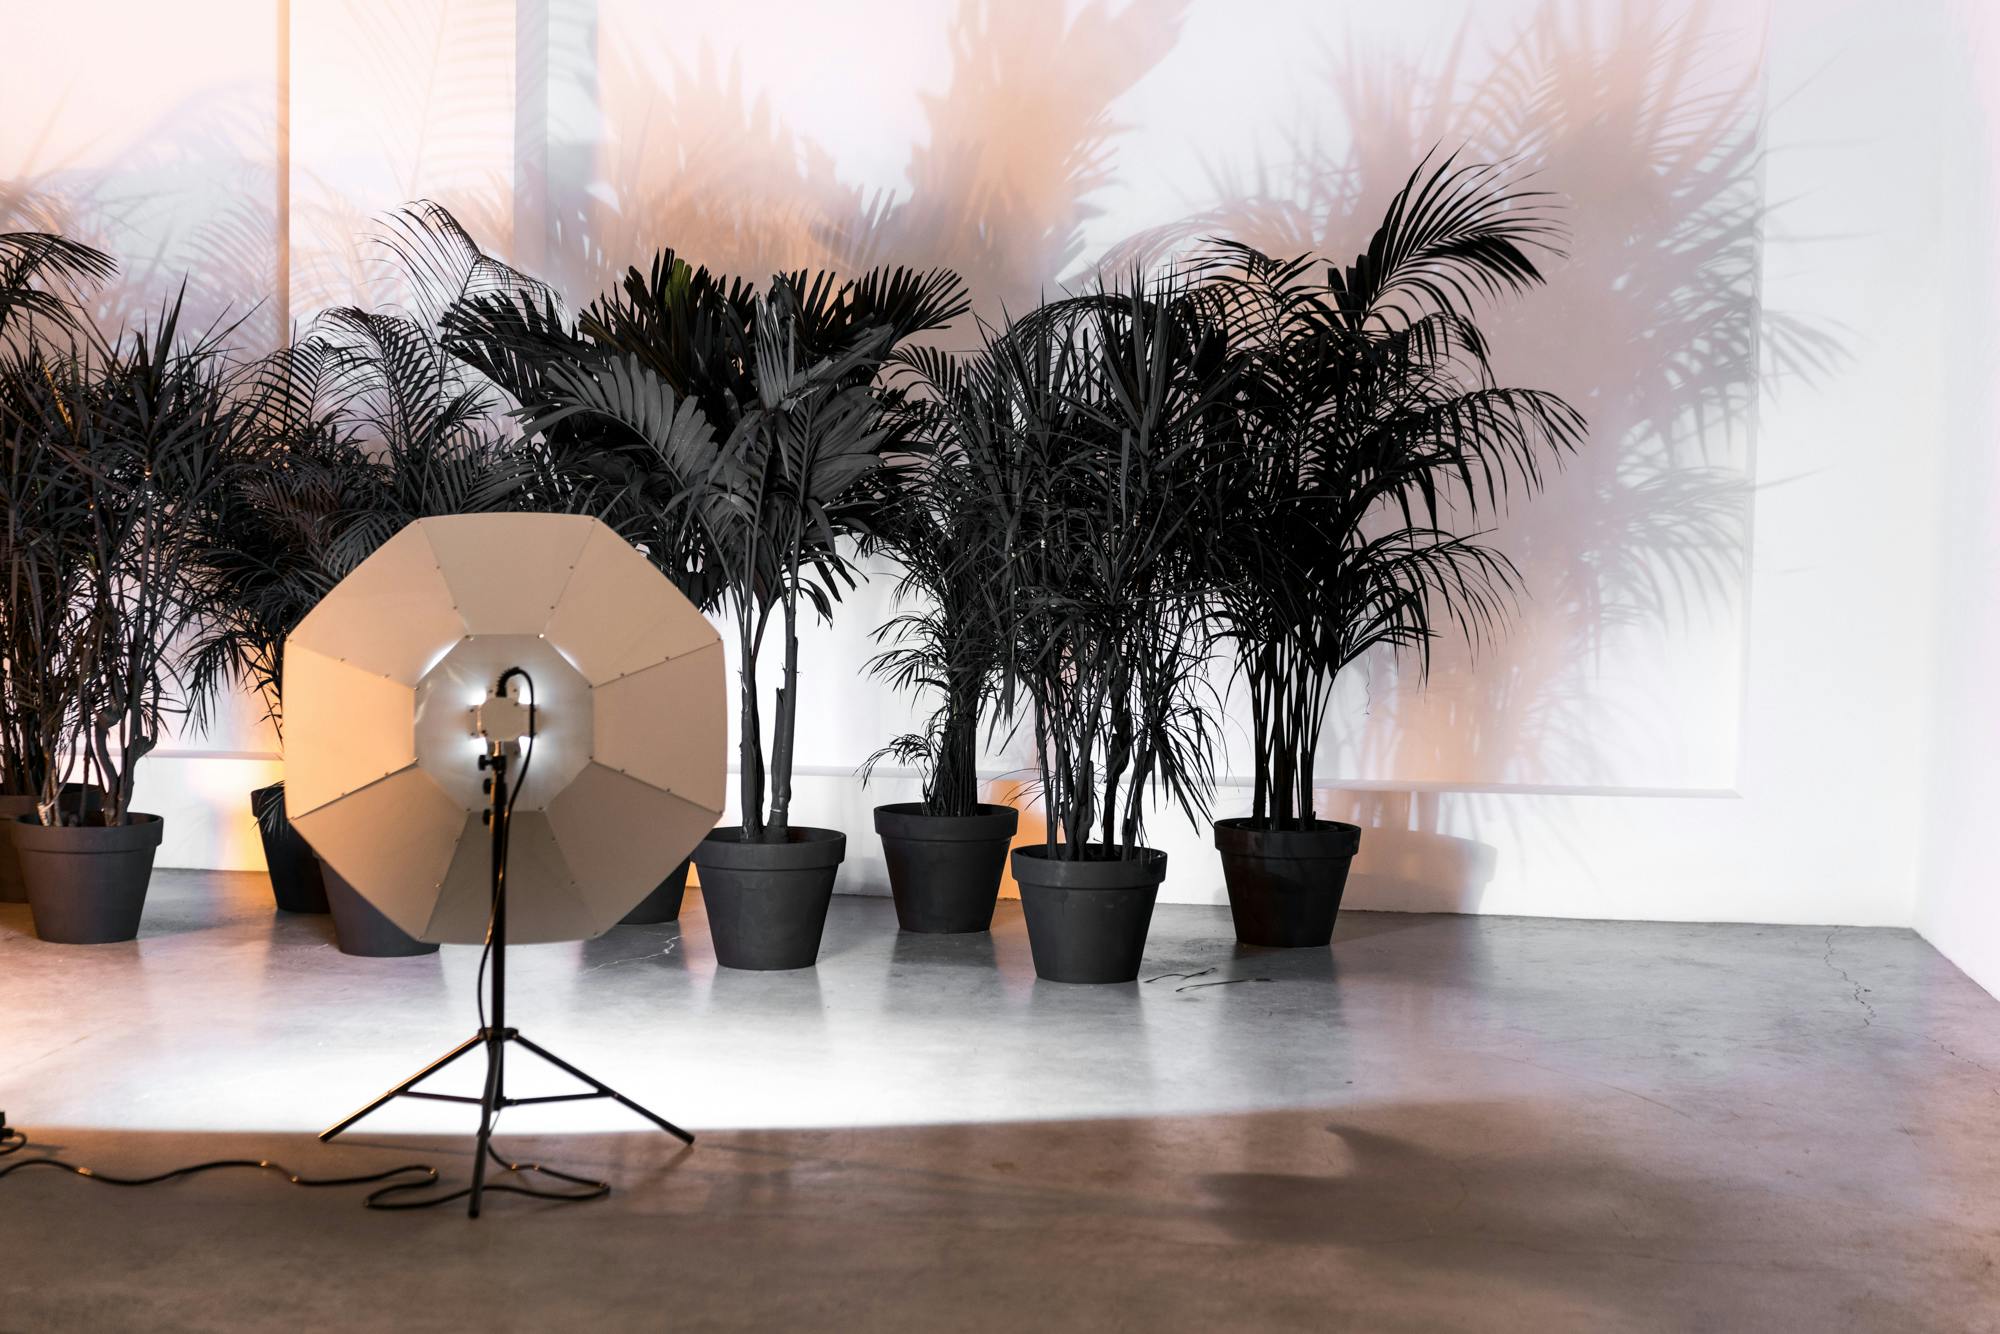 An installation of palm trees in pots painted in mat black. A light pink and blue light shines on them casting dynamic shadows on the wall behind them.